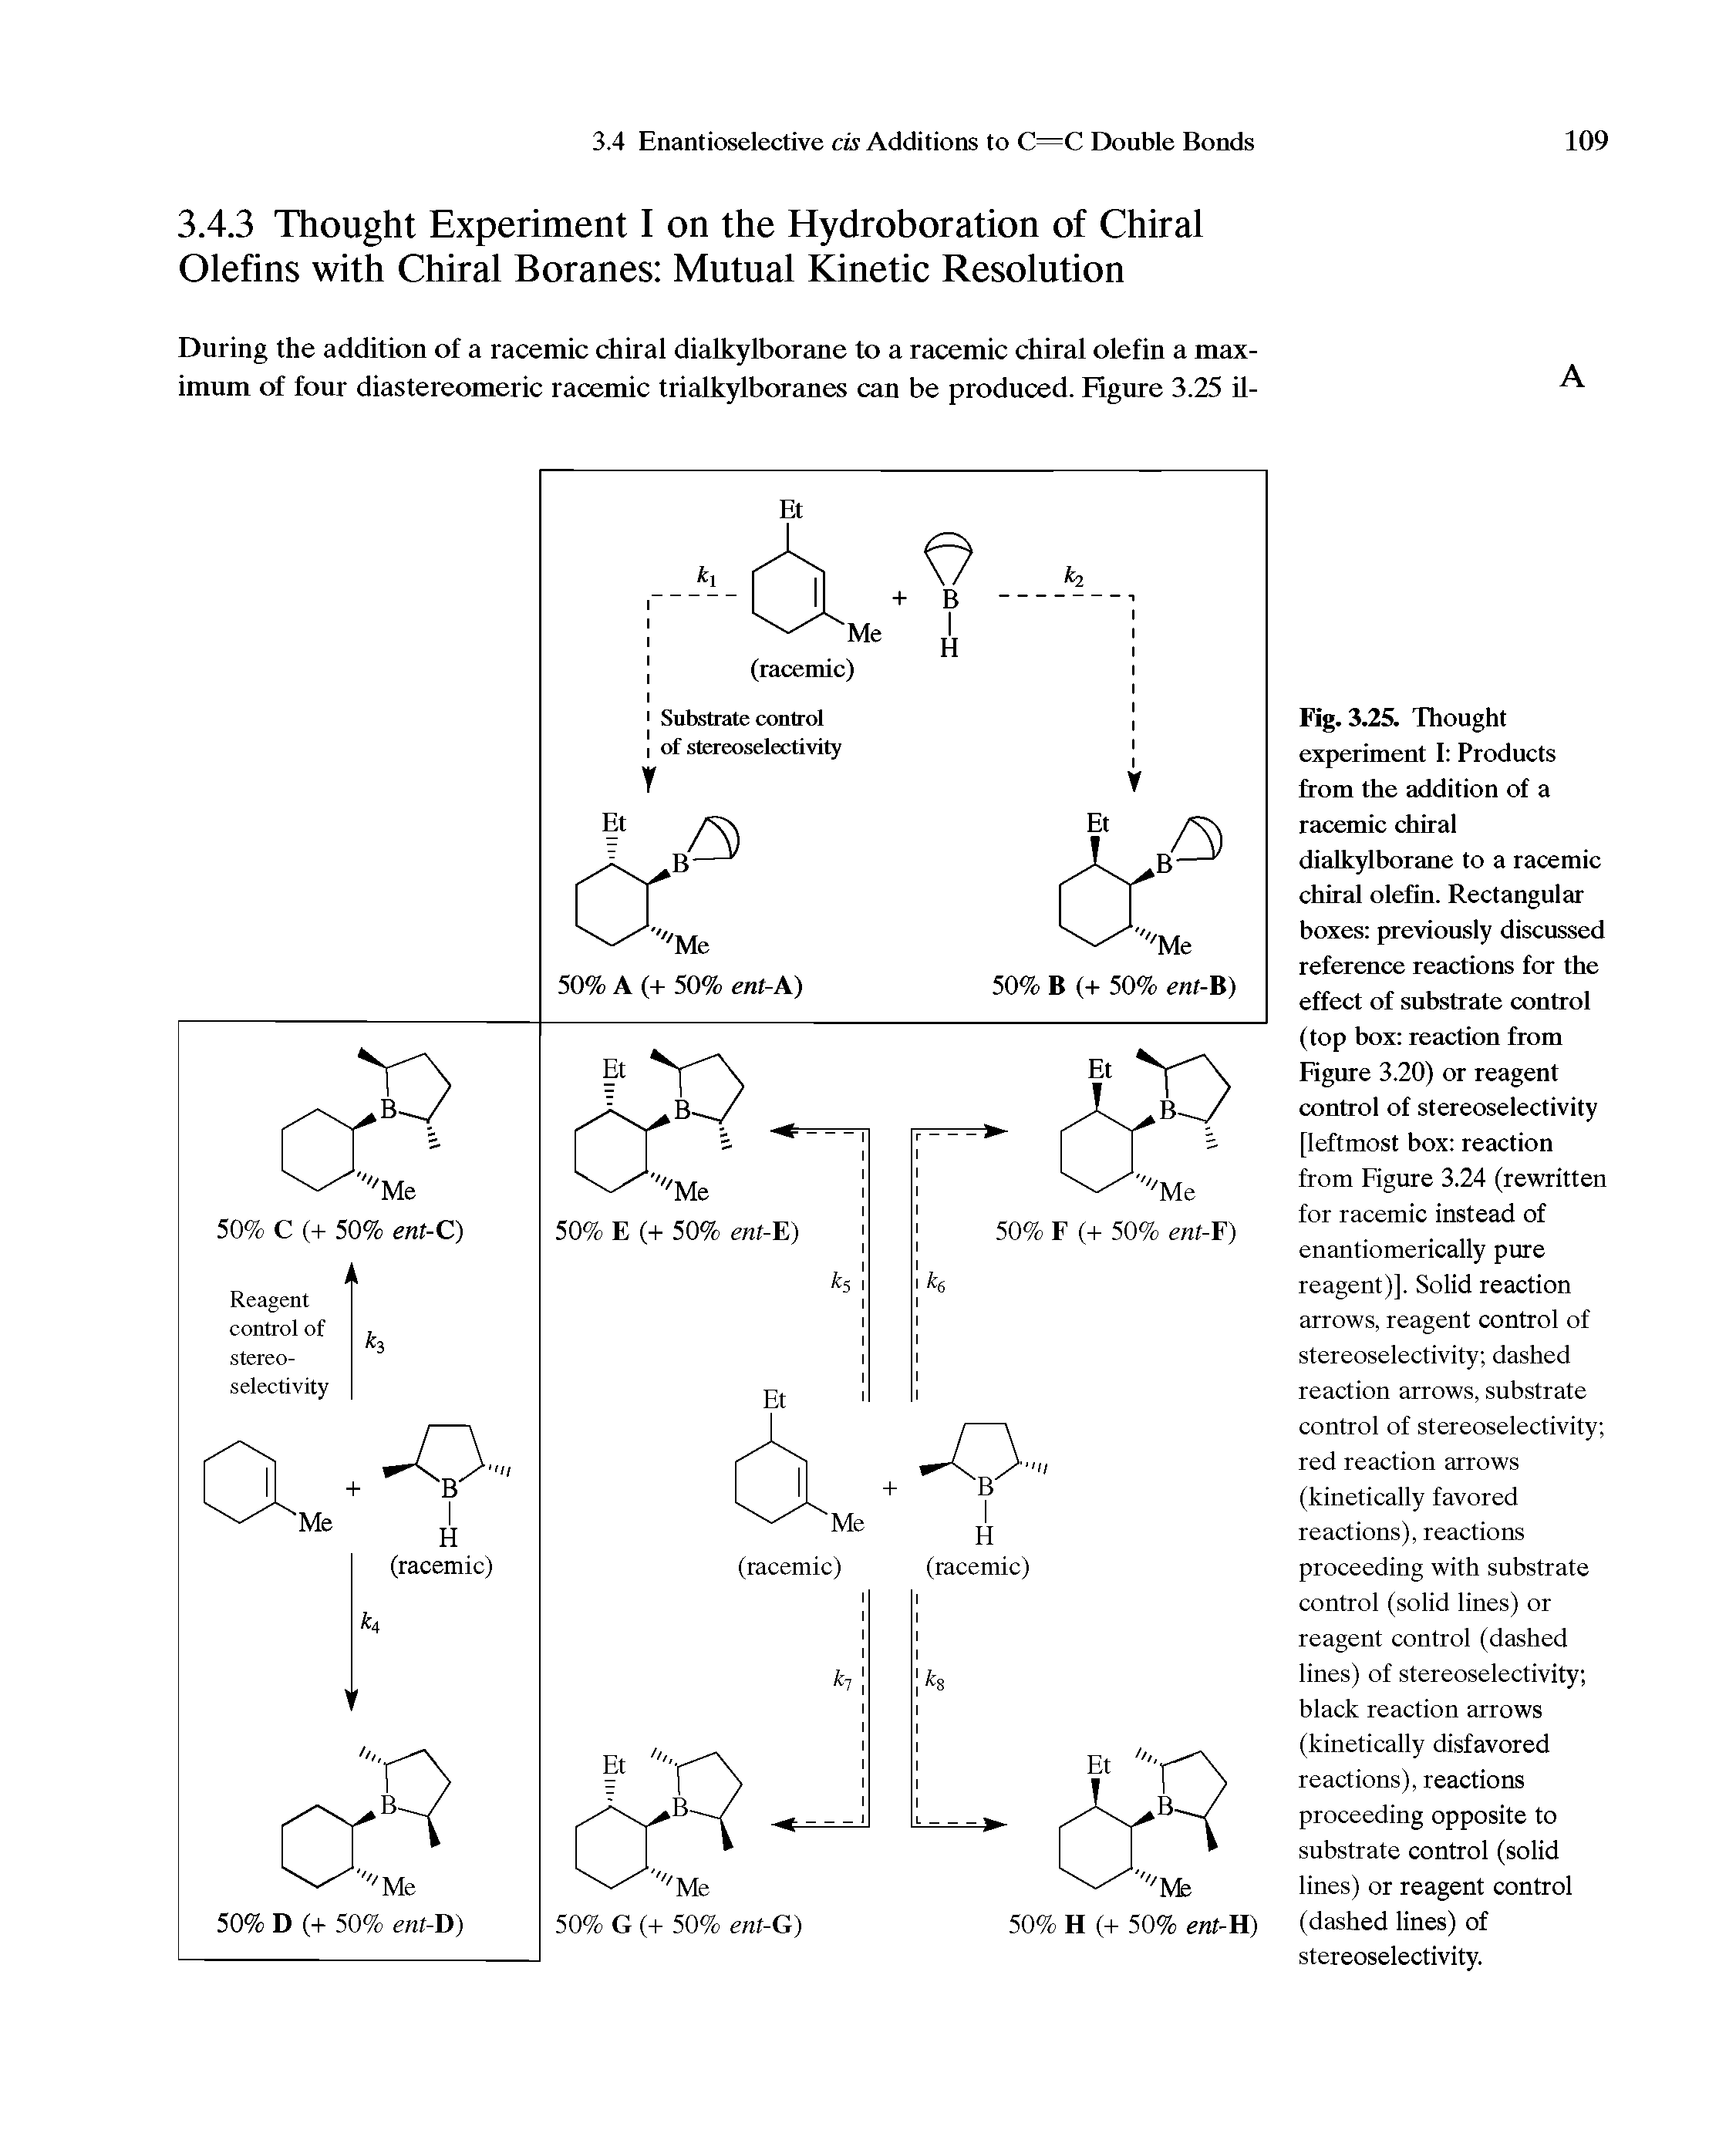 Fig. 3.25. Thought experiment I Products from the addition of a racemic chiral dialkylborane to a racemic chiral olefin. Rectangular boxes previously discussed reference reactions for the effect of substrate control (top box reaction from Figure 3.20) or reagent control of stereoselectivity [leftmost box reaction from Figure 3.24 (rewritten for racemic instead of enantiomerically pure reagent)]. Solid reaction arrows, reagent control of stereoselectivity dashed reaction arrows, substrate control of stereoselectivity red reaction arrows (kinetically favored reactions), reactions proceeding with substrate control (solid lines) or reagent control (dashed lines) of stereoselectivity black reaction arrows (kinetically disfavored reactions), reactions proceeding opposite to substrate control (solid lines) or reagent control (dashed lines) of stereoselectivity.